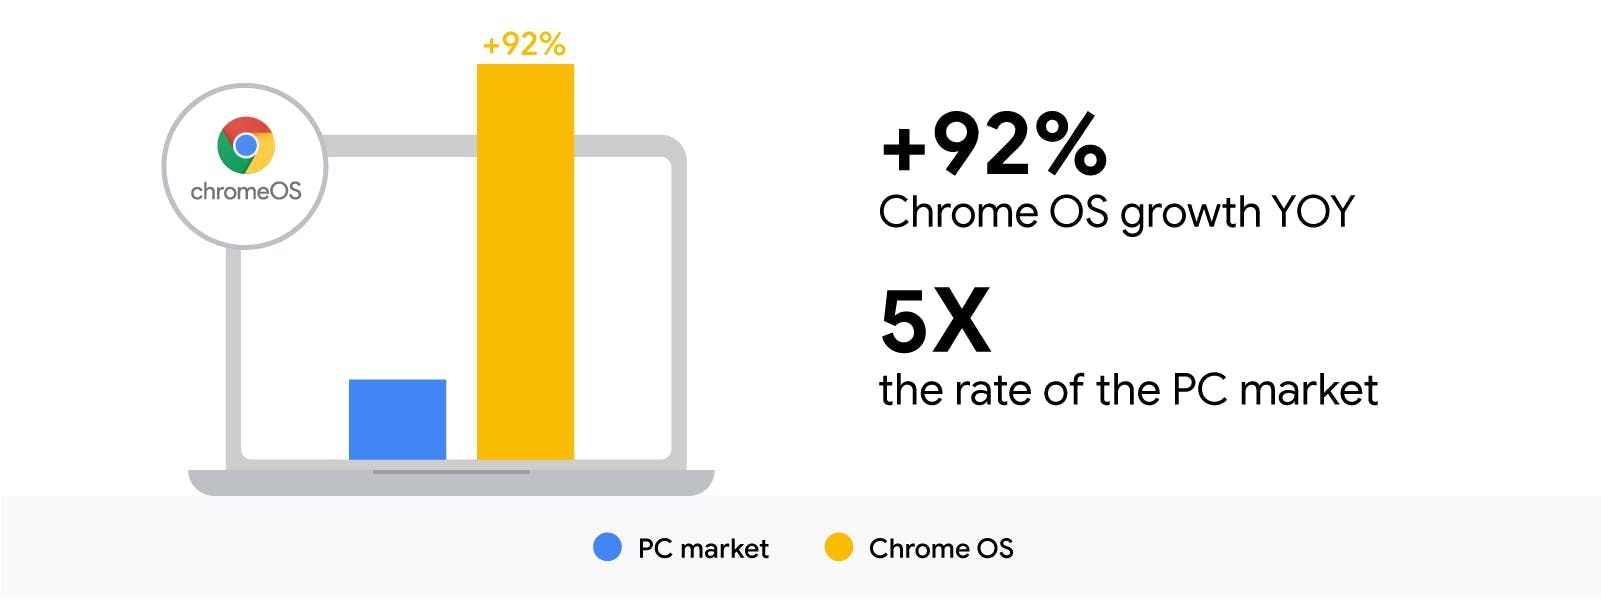 92% ChromeOS growth at 5x the rate of the PC market.